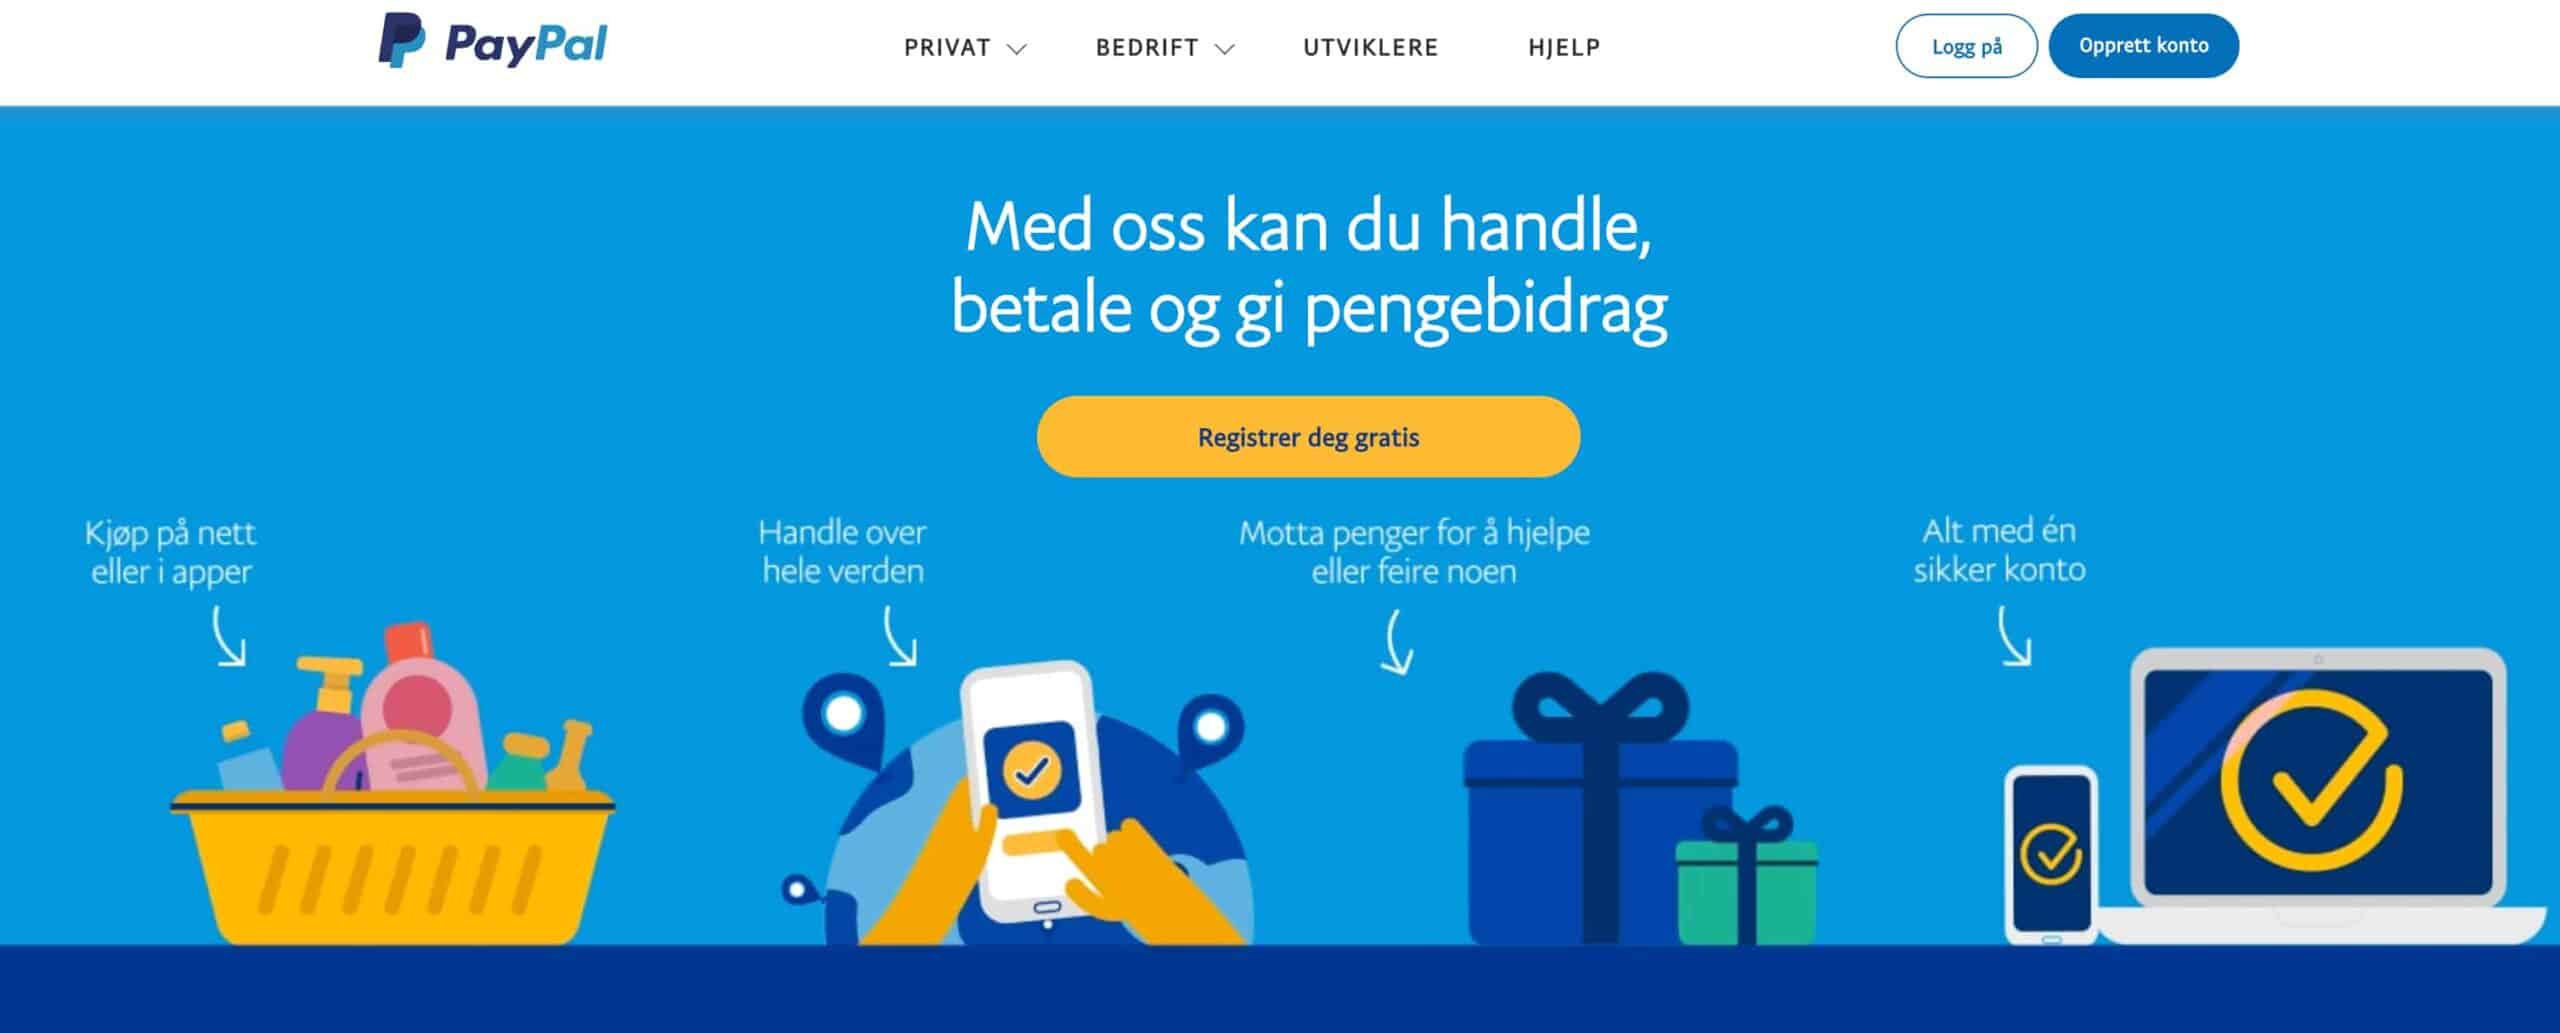 Paypal norge